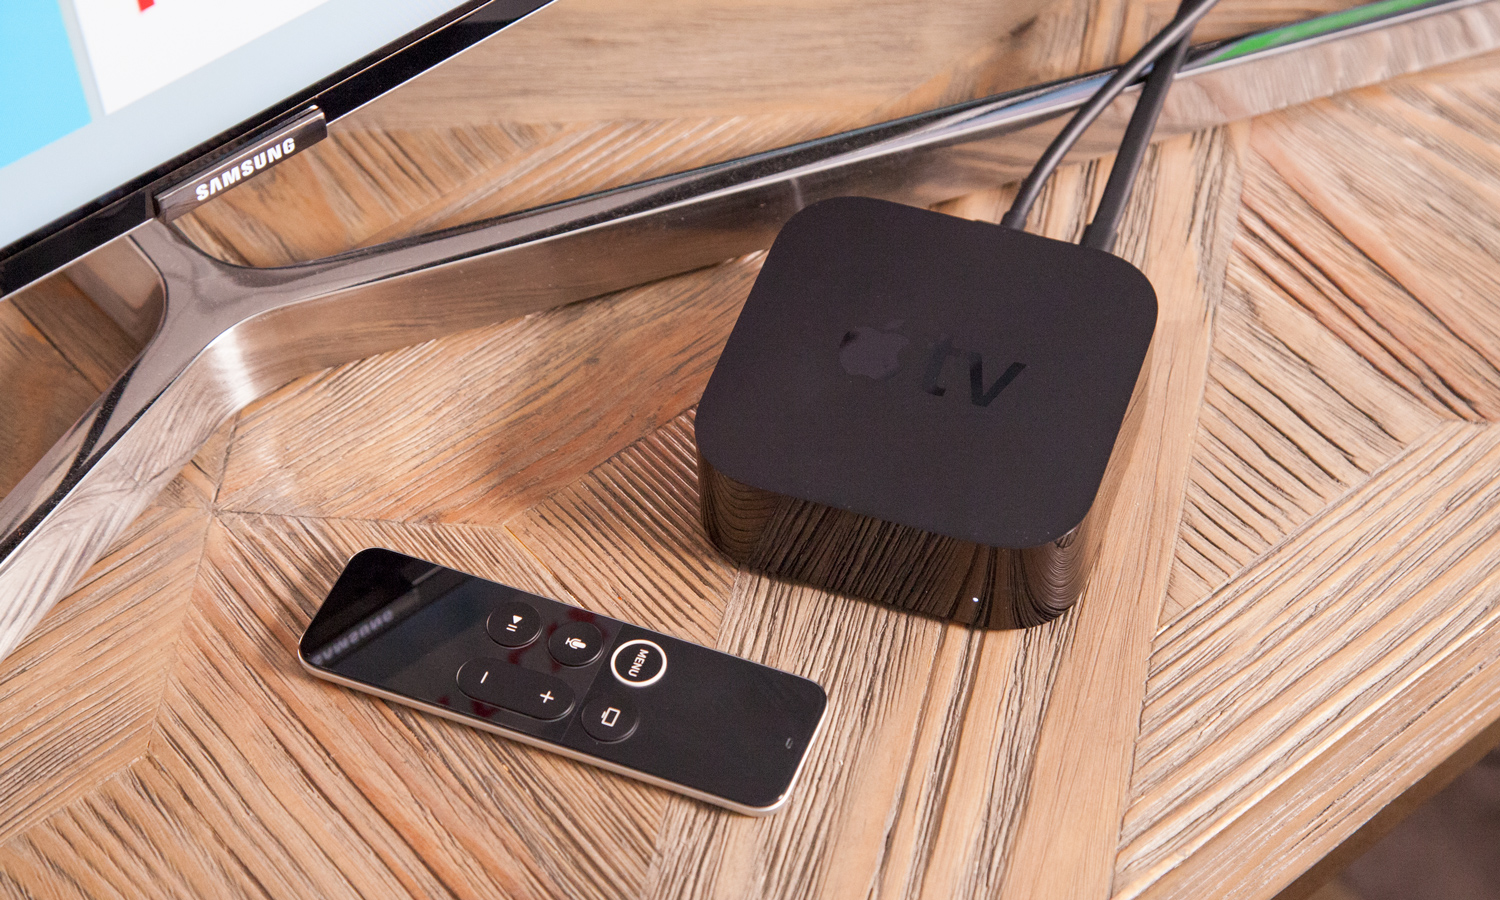 Apple reportedly has a new TV Stick and Amazon Echo-style speaker in the works